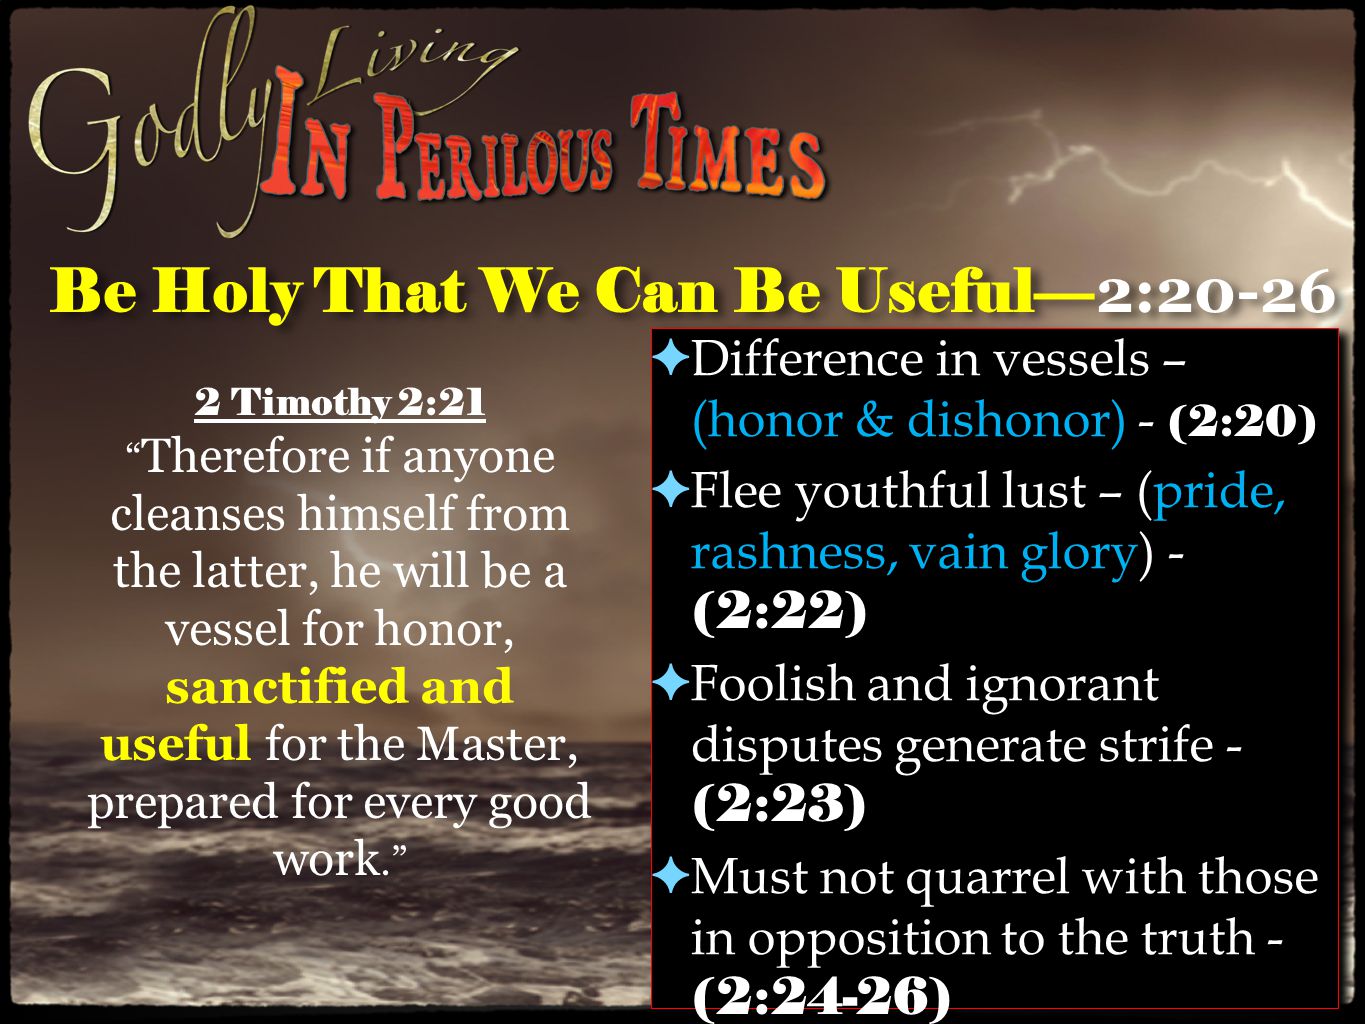 Be Holy That We Can Be Useful— 2:20-26 ✦ Difference in vessels – (honor & dishonor) - (2:20) ✦ Flee youthful lust – (pride, rashness, vain glory) - (2:22) ✦ Foolish and ignorant disputes generate strife - (2:23) ✦ Must not quarrel with those in opposition to the truth - (2:24-26) ✦ Difference in vessels – (honor & dishonor) - (2:20) ✦ Flee youthful lust – (pride, rashness, vain glory) - (2:22) ✦ Foolish and ignorant disputes generate strife - (2:23) ✦ Must not quarrel with those in opposition to the truth - (2:24-26) 2 Timothy 2:21 Therefore if anyone cleanses himself from the latter, he will be a vessel for honor, sanctified and useful for the Master, prepared for every good work.